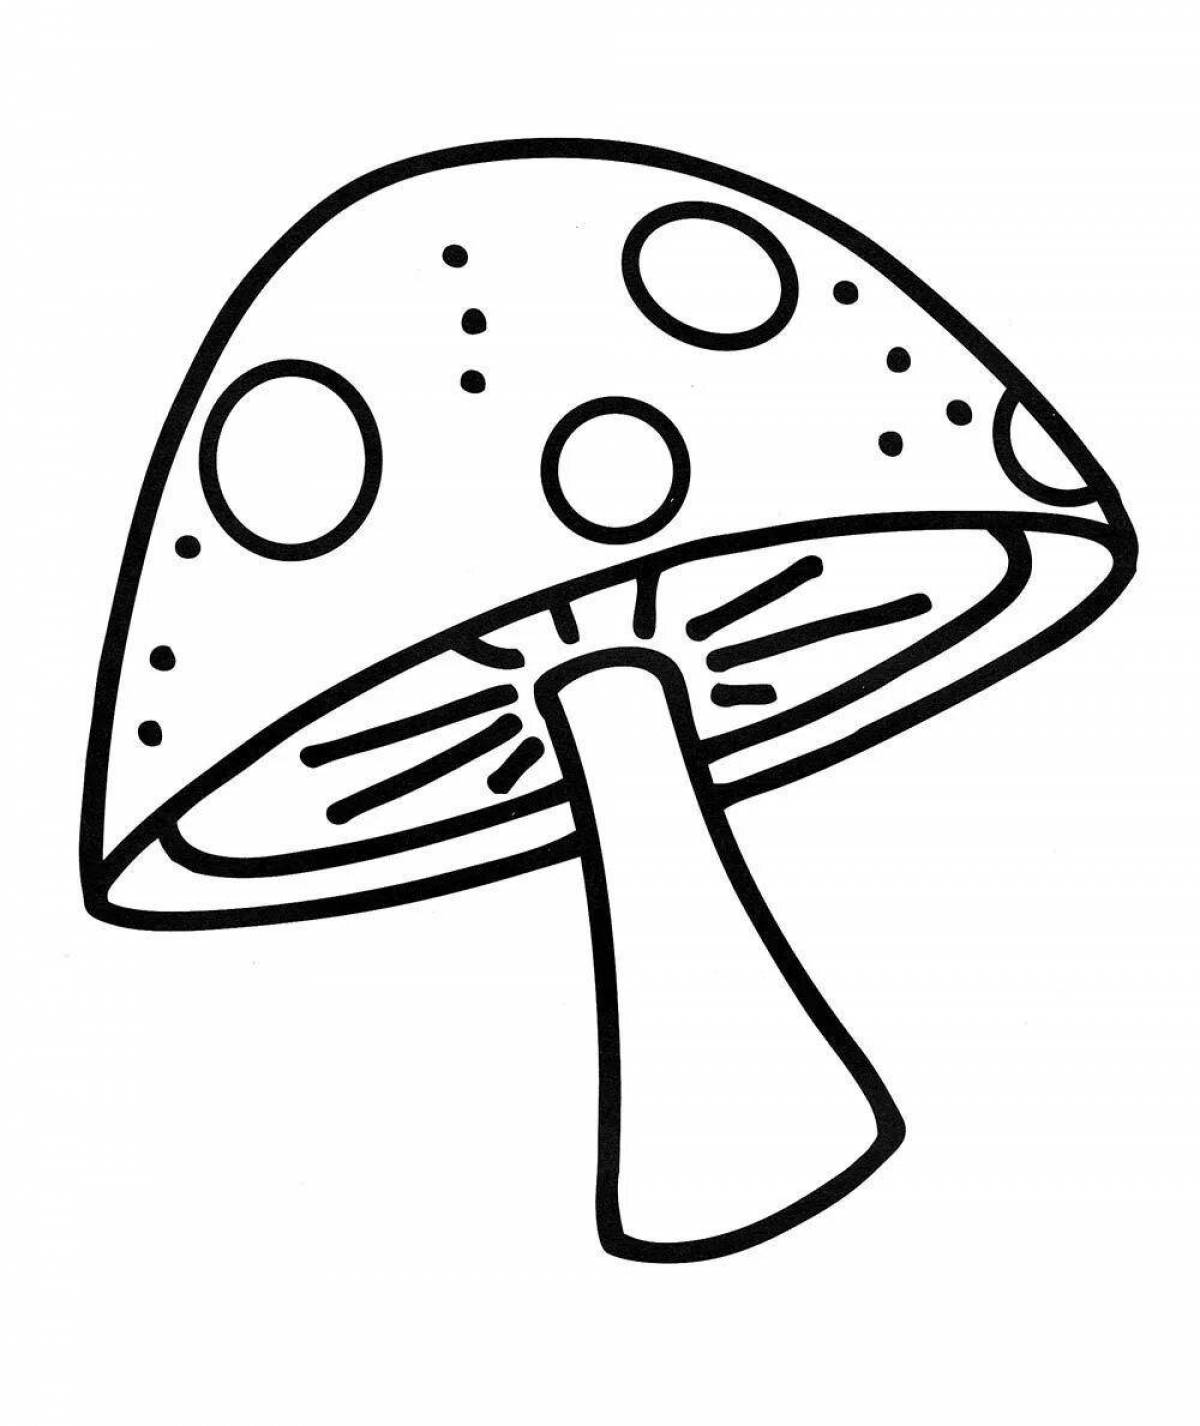 Great fly agaric drawing for students